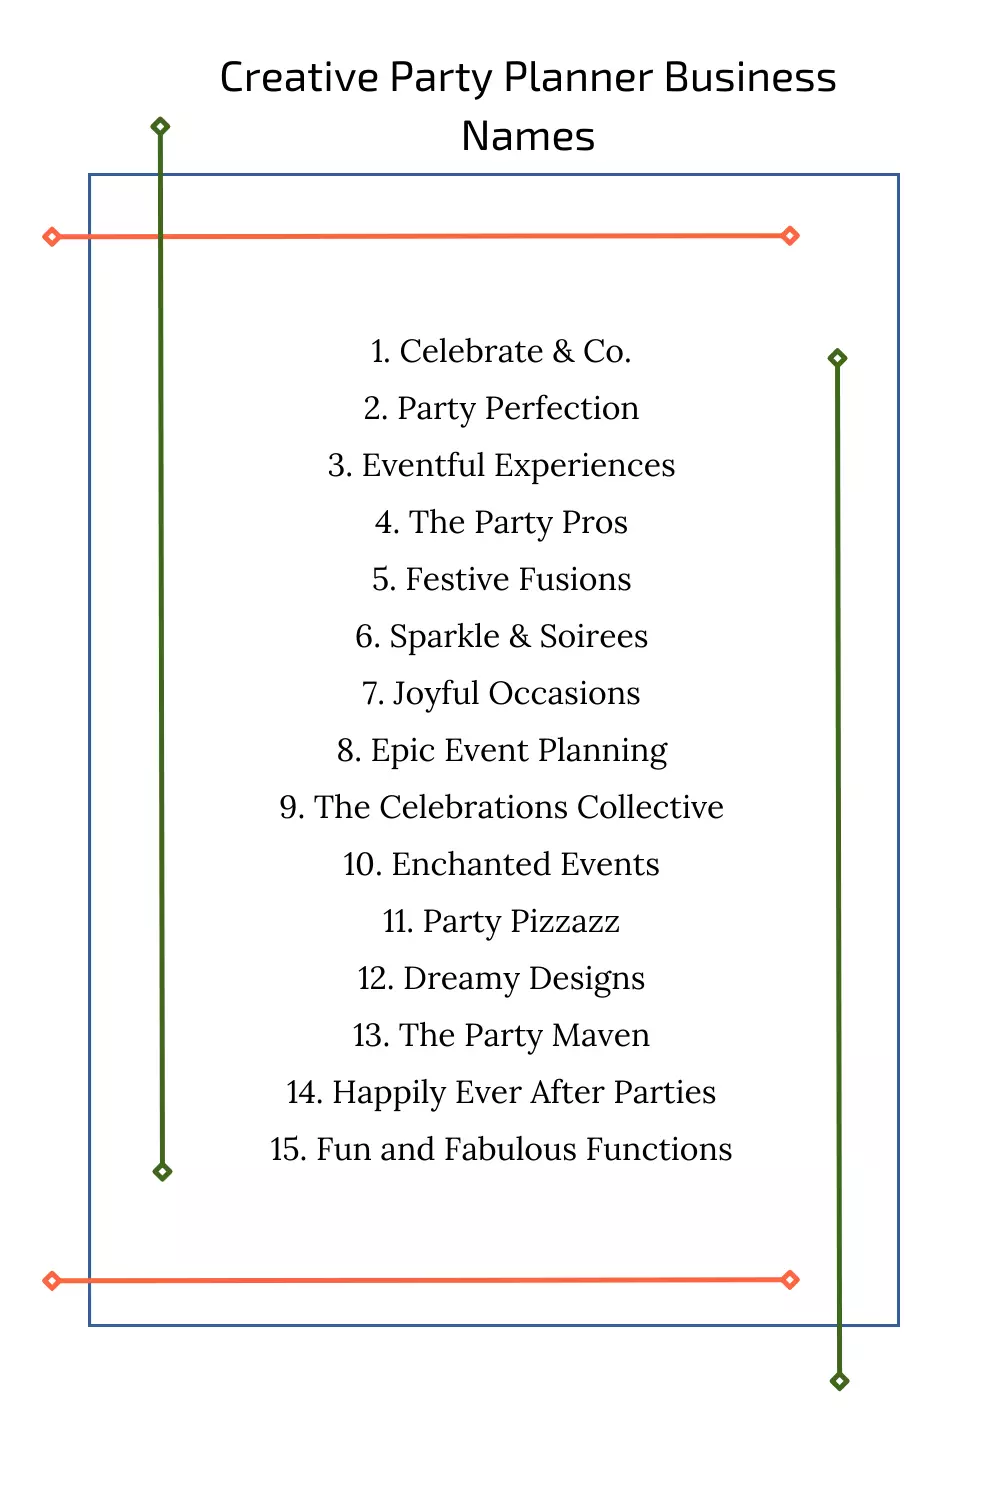 Creative Party Planner Business Names